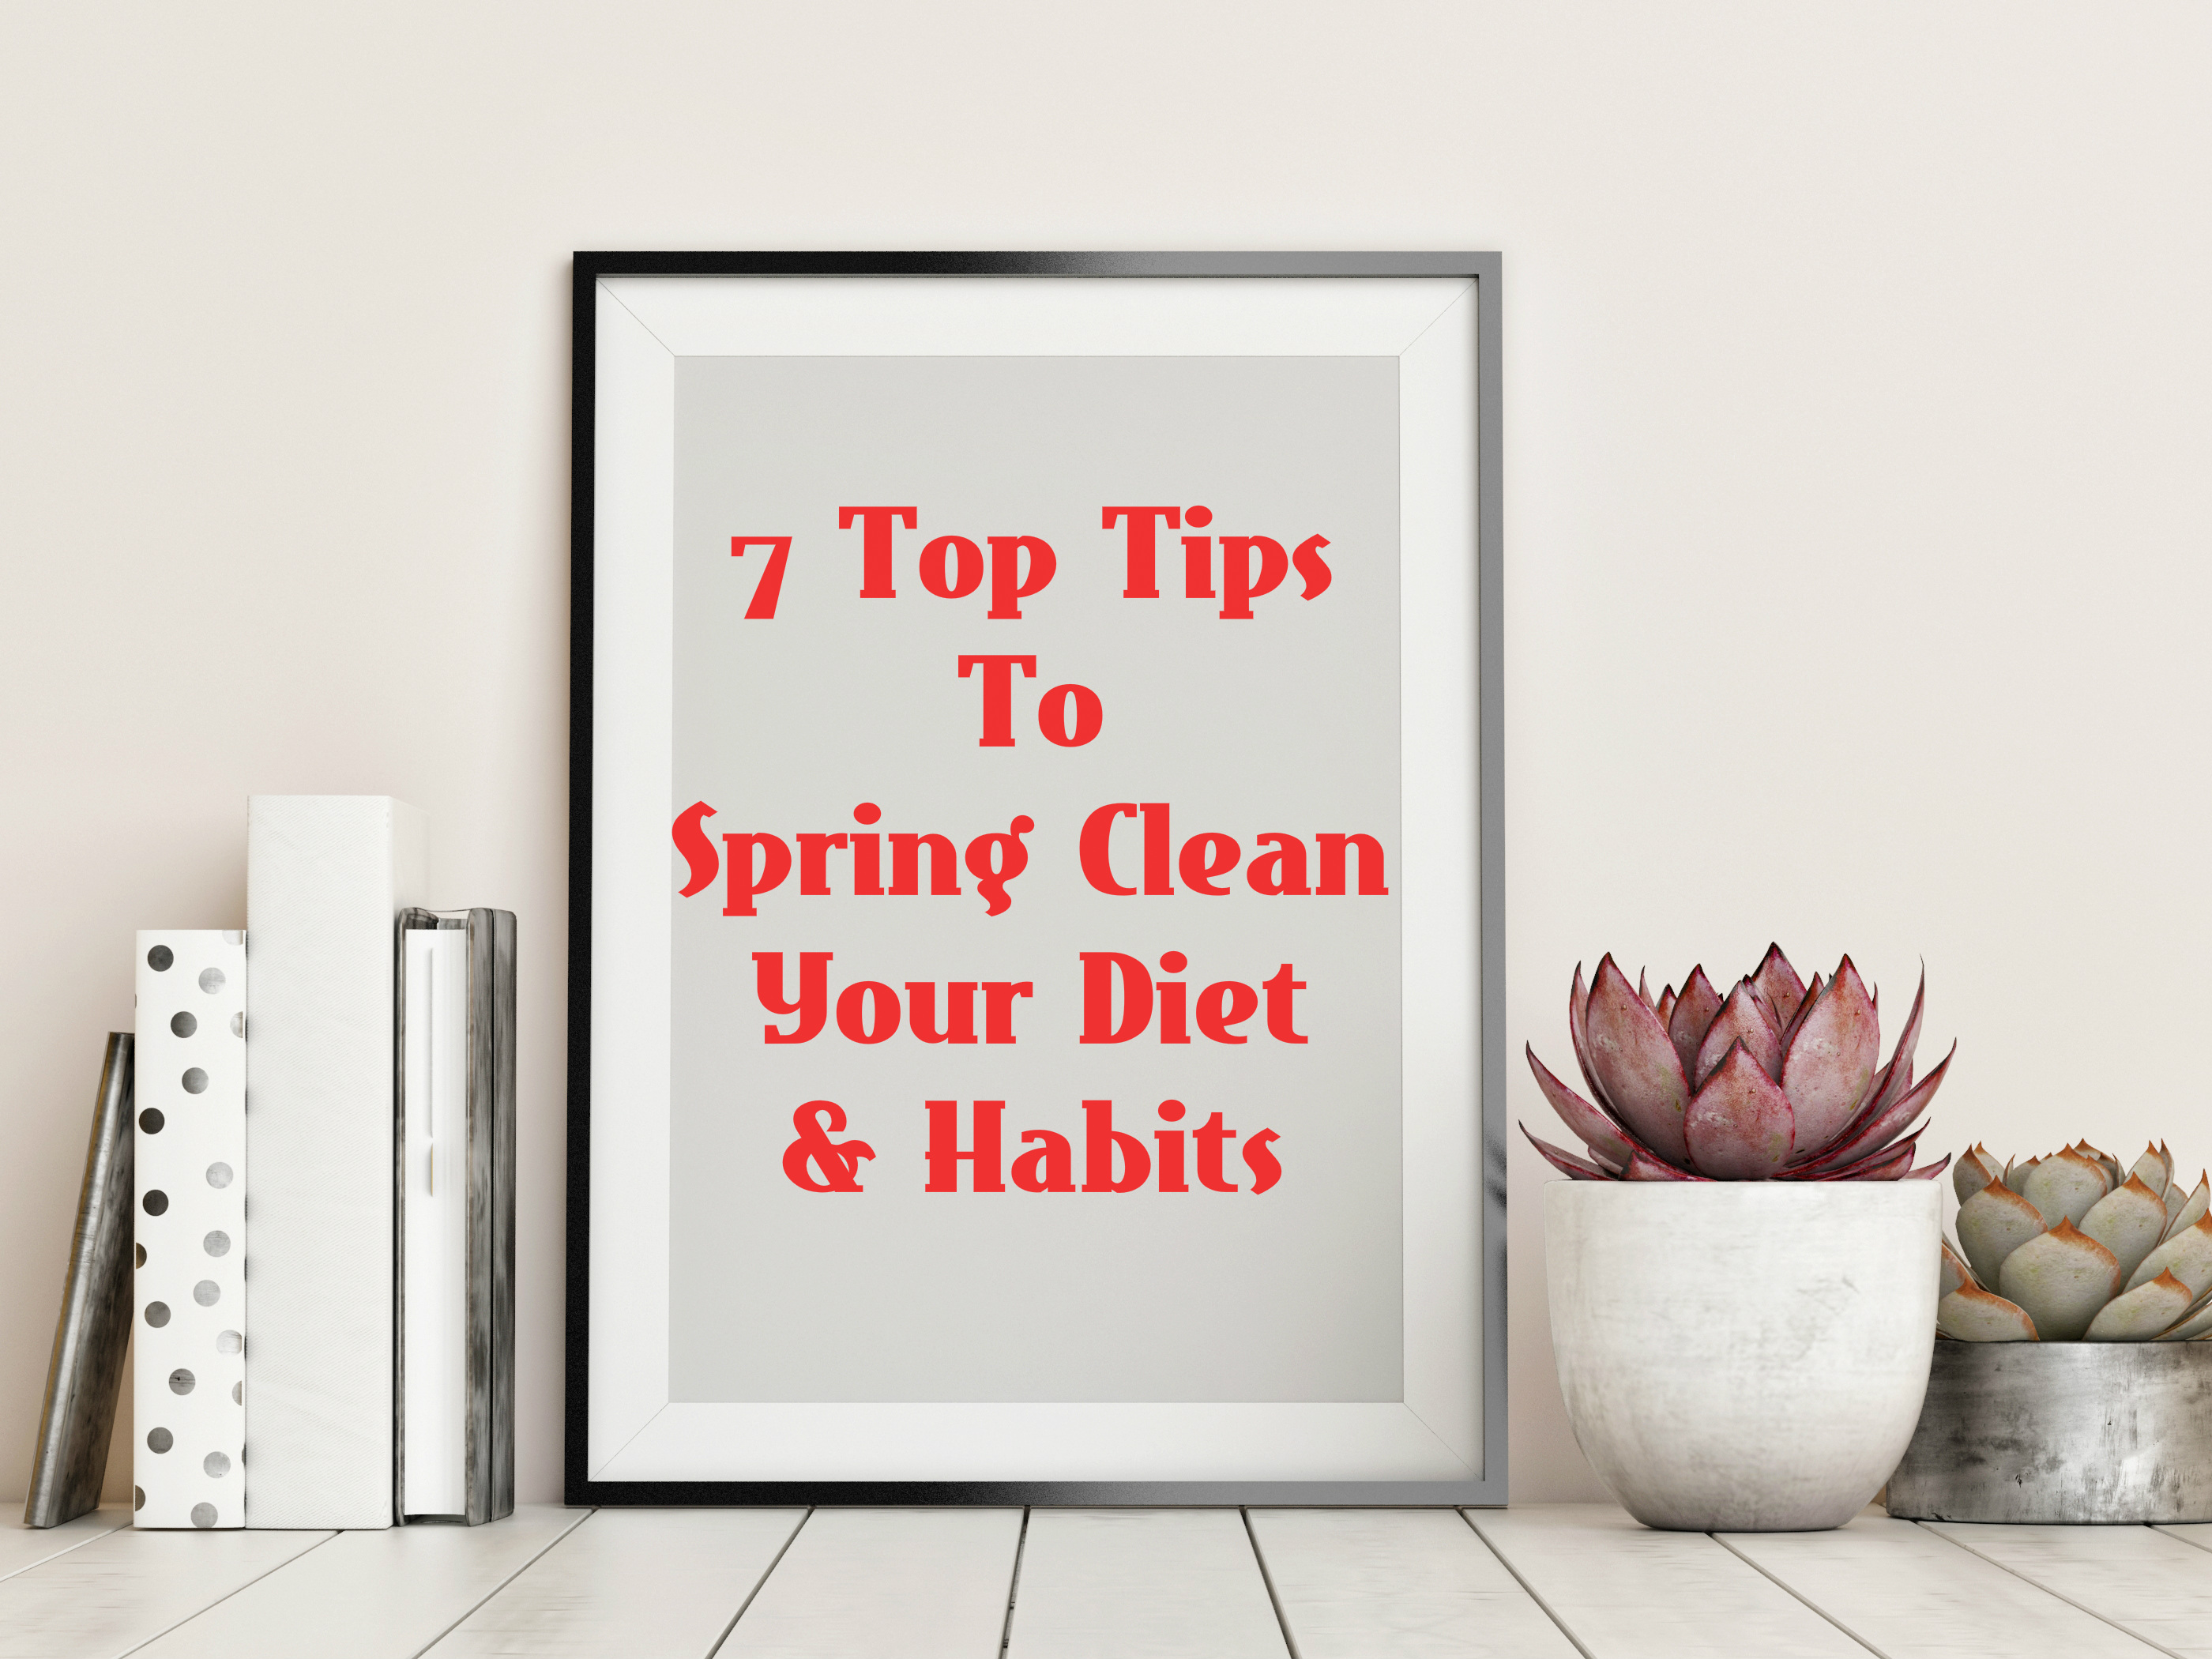 7 Top Tips To Spring Clean Your Diet & Habits